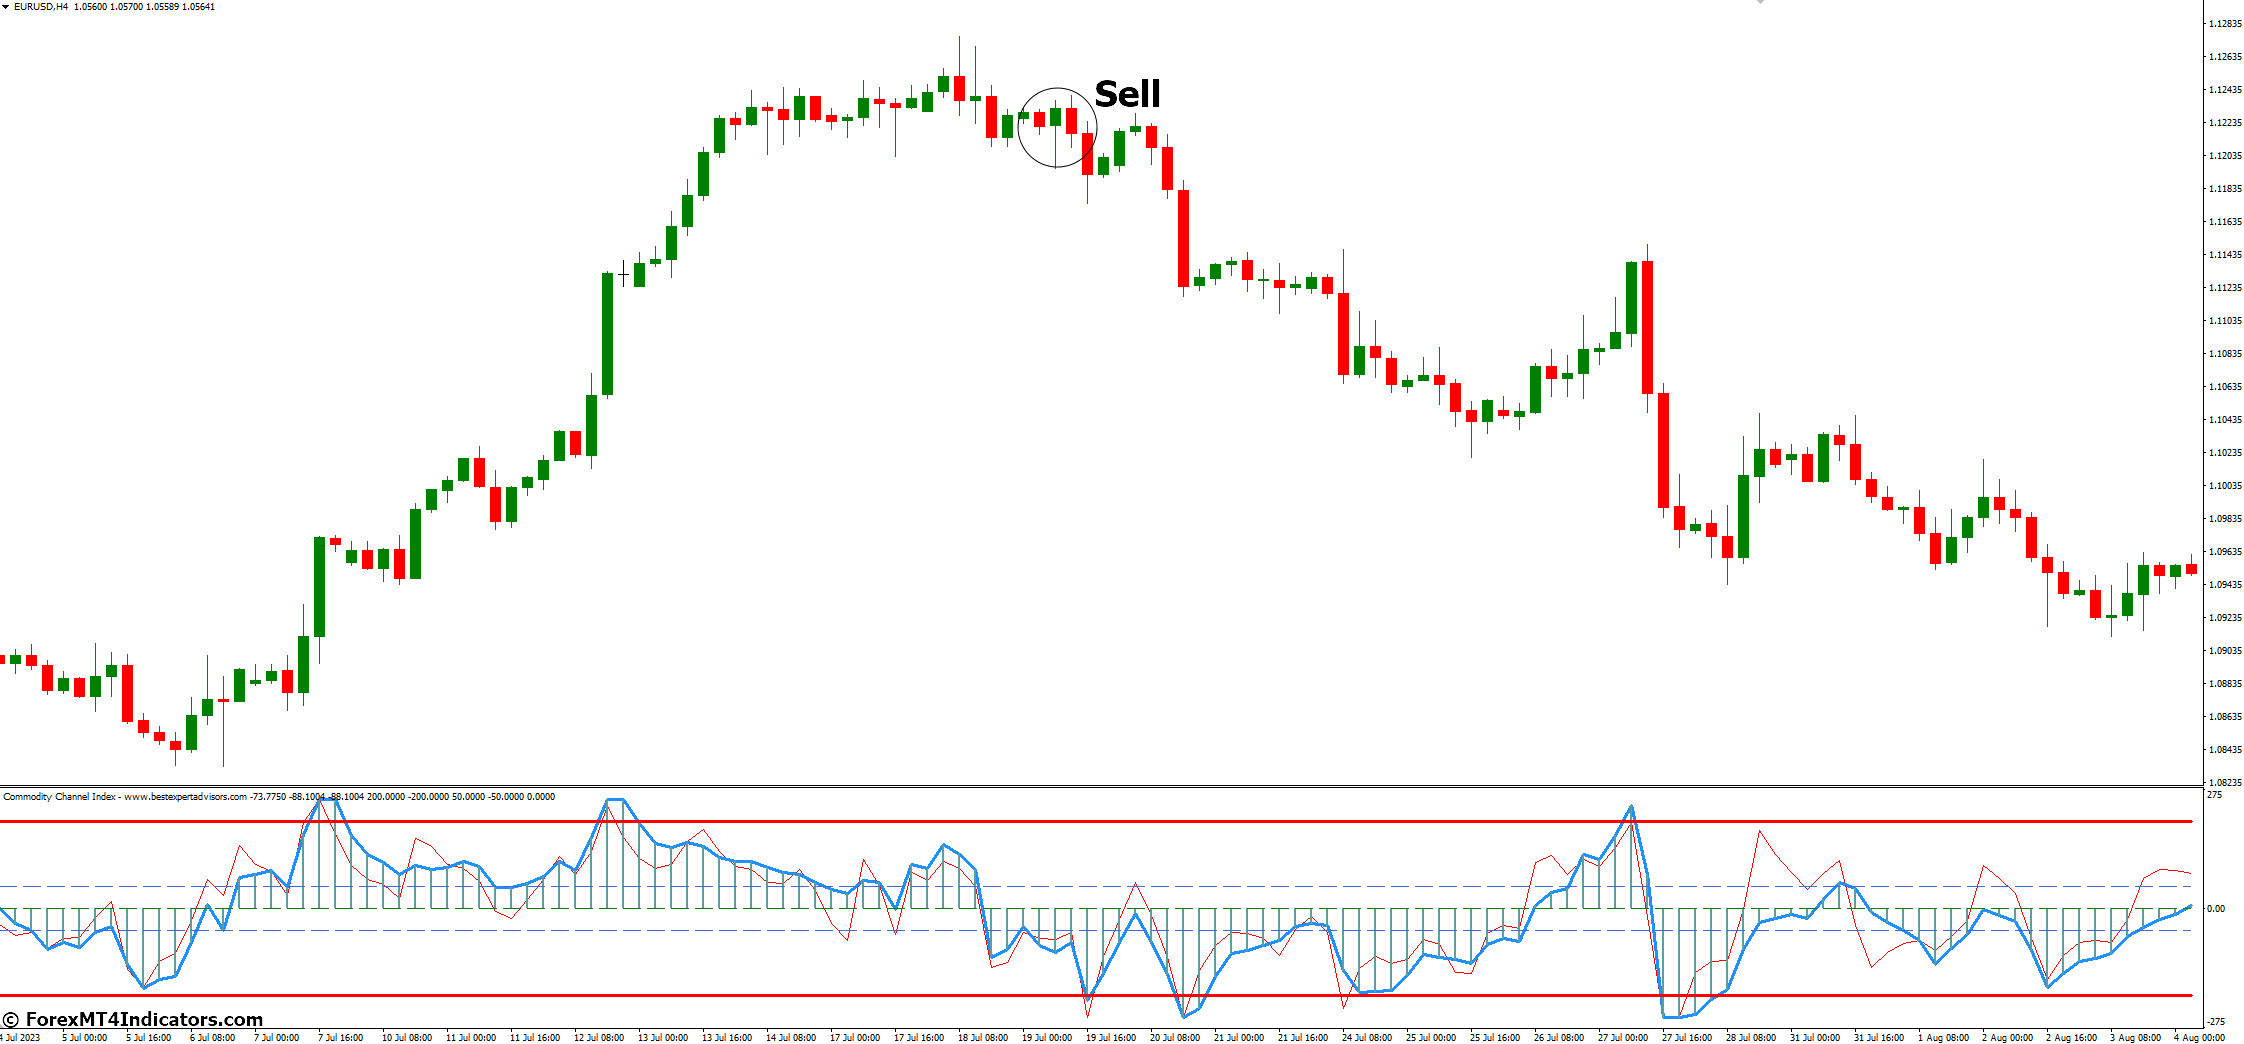 How to Trade with Commodity Channel Index MT4 Indicator - Sell Entry